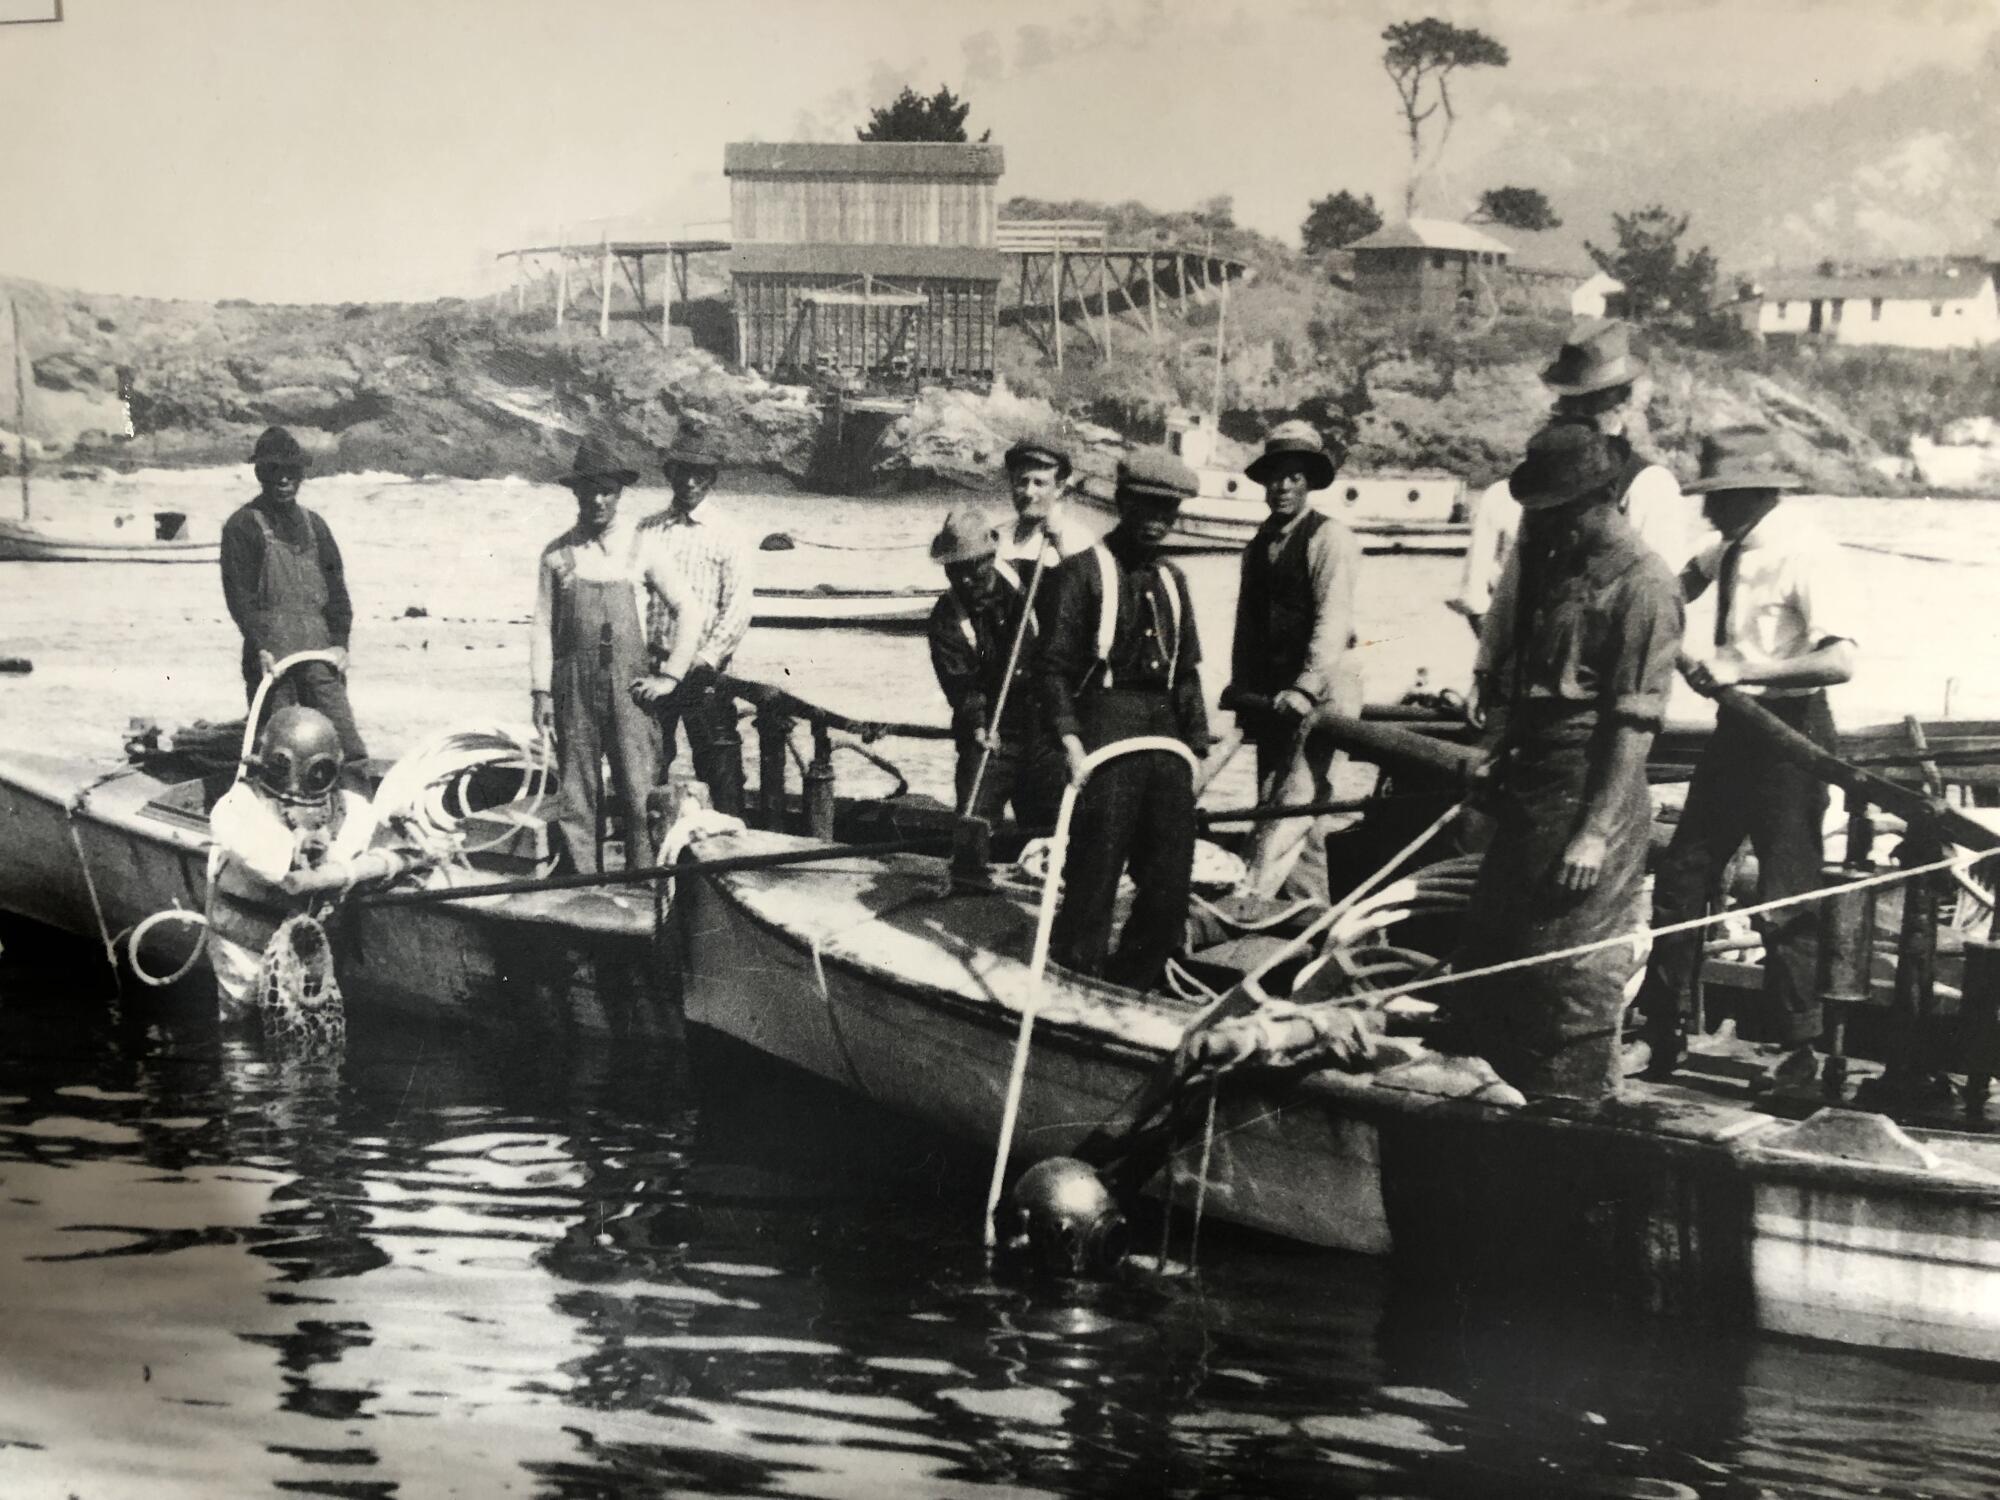 A black-and-white historic photo of several men standing on boats at water's edge as two divers emerge from the water.